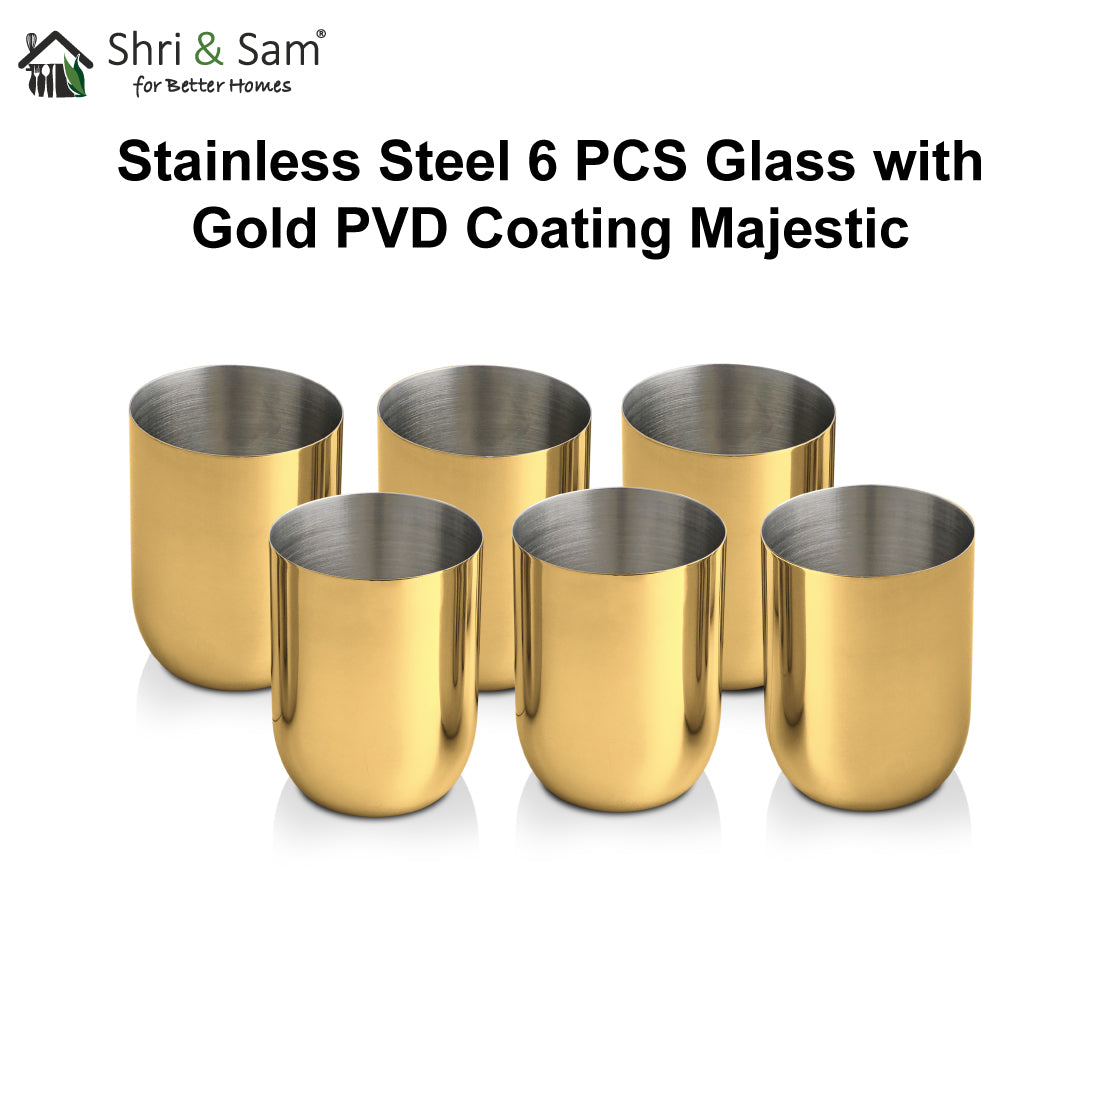 Stainless Steel 6 PCS Glass with Gold PVD Coating Majestic